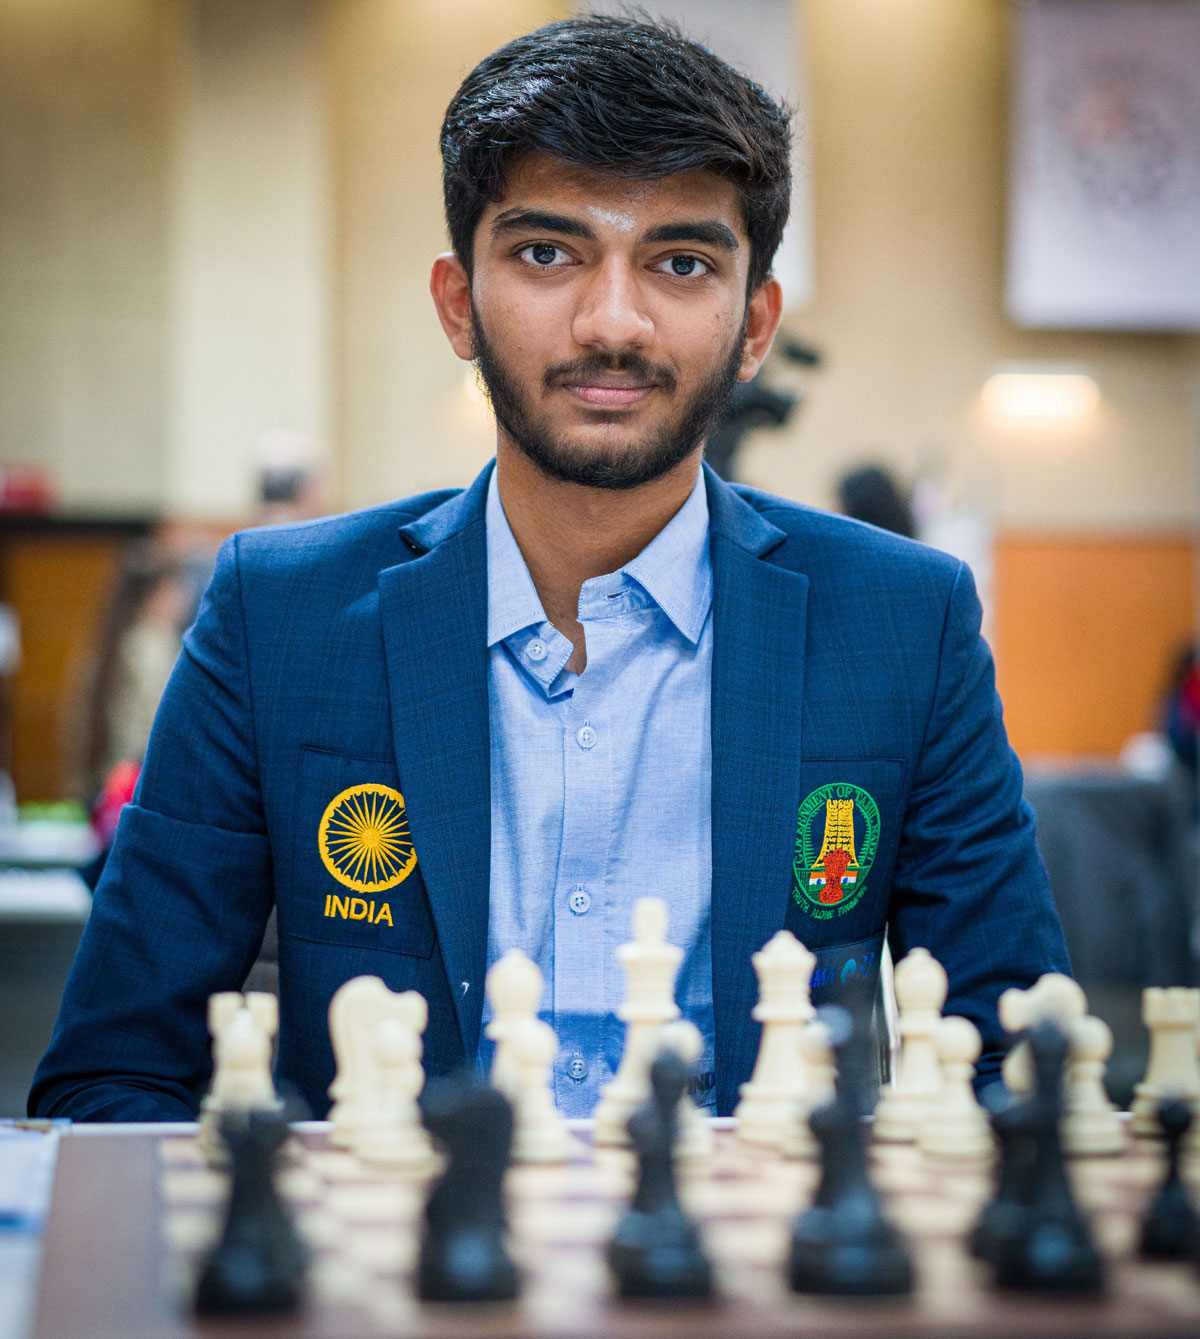 Grand Chess Tour Anand has moderate day; Gukesh shines with twin wins